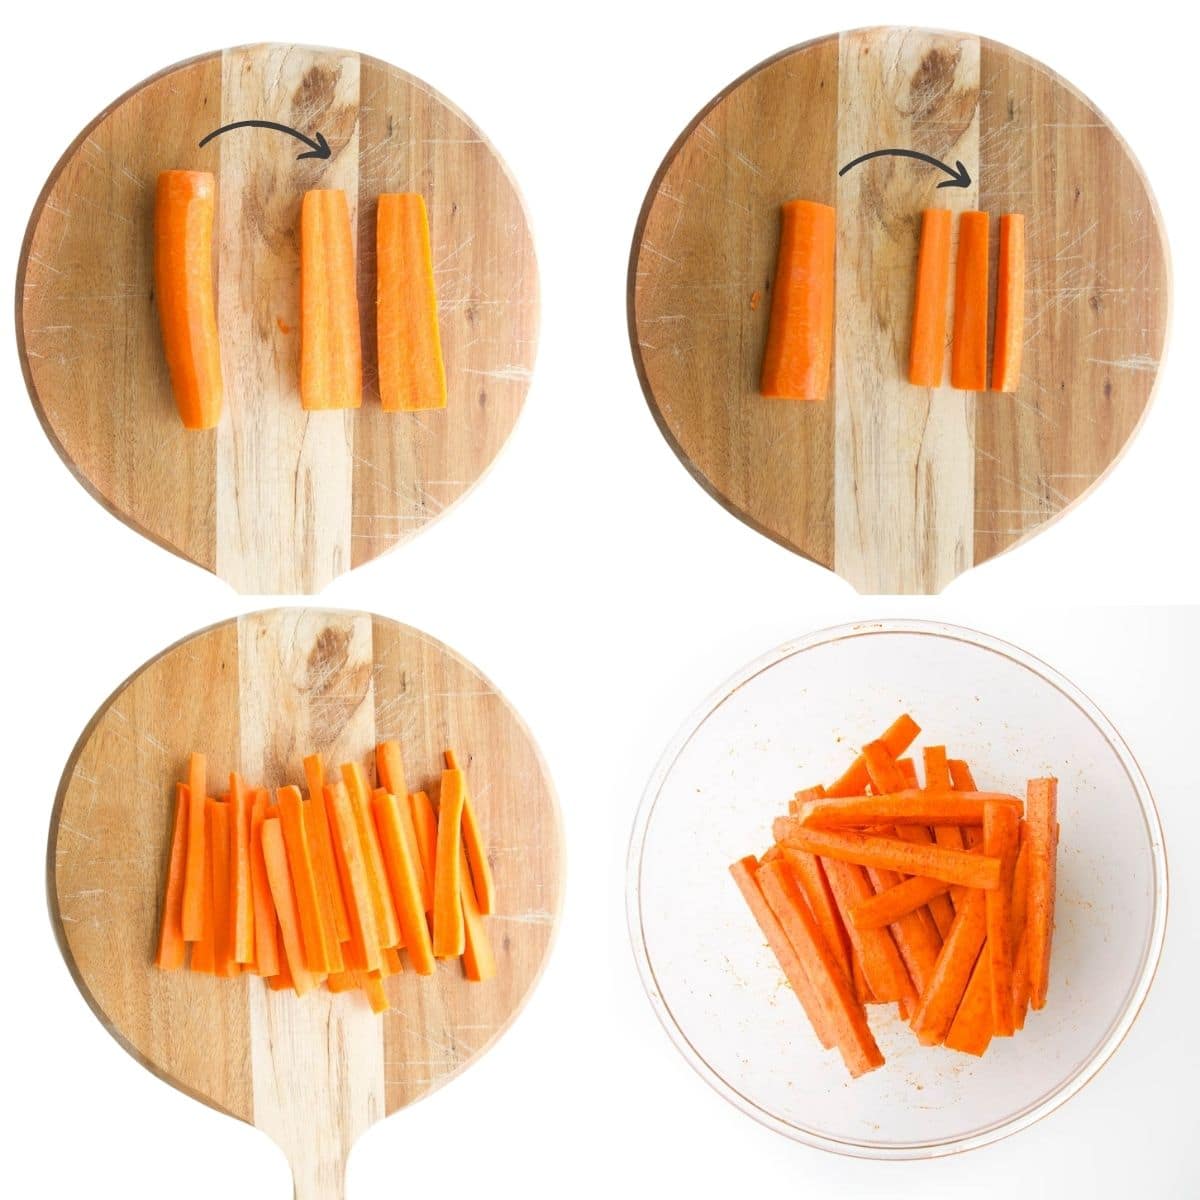 Collage of 4 Images Showing How to Prepare Carrots (1) Cut in half and through middle 2) Cut into sticks approx 1cm x 10cm 3) Carrots Cut 4) Carrots in Bowl with Oil and Paprika